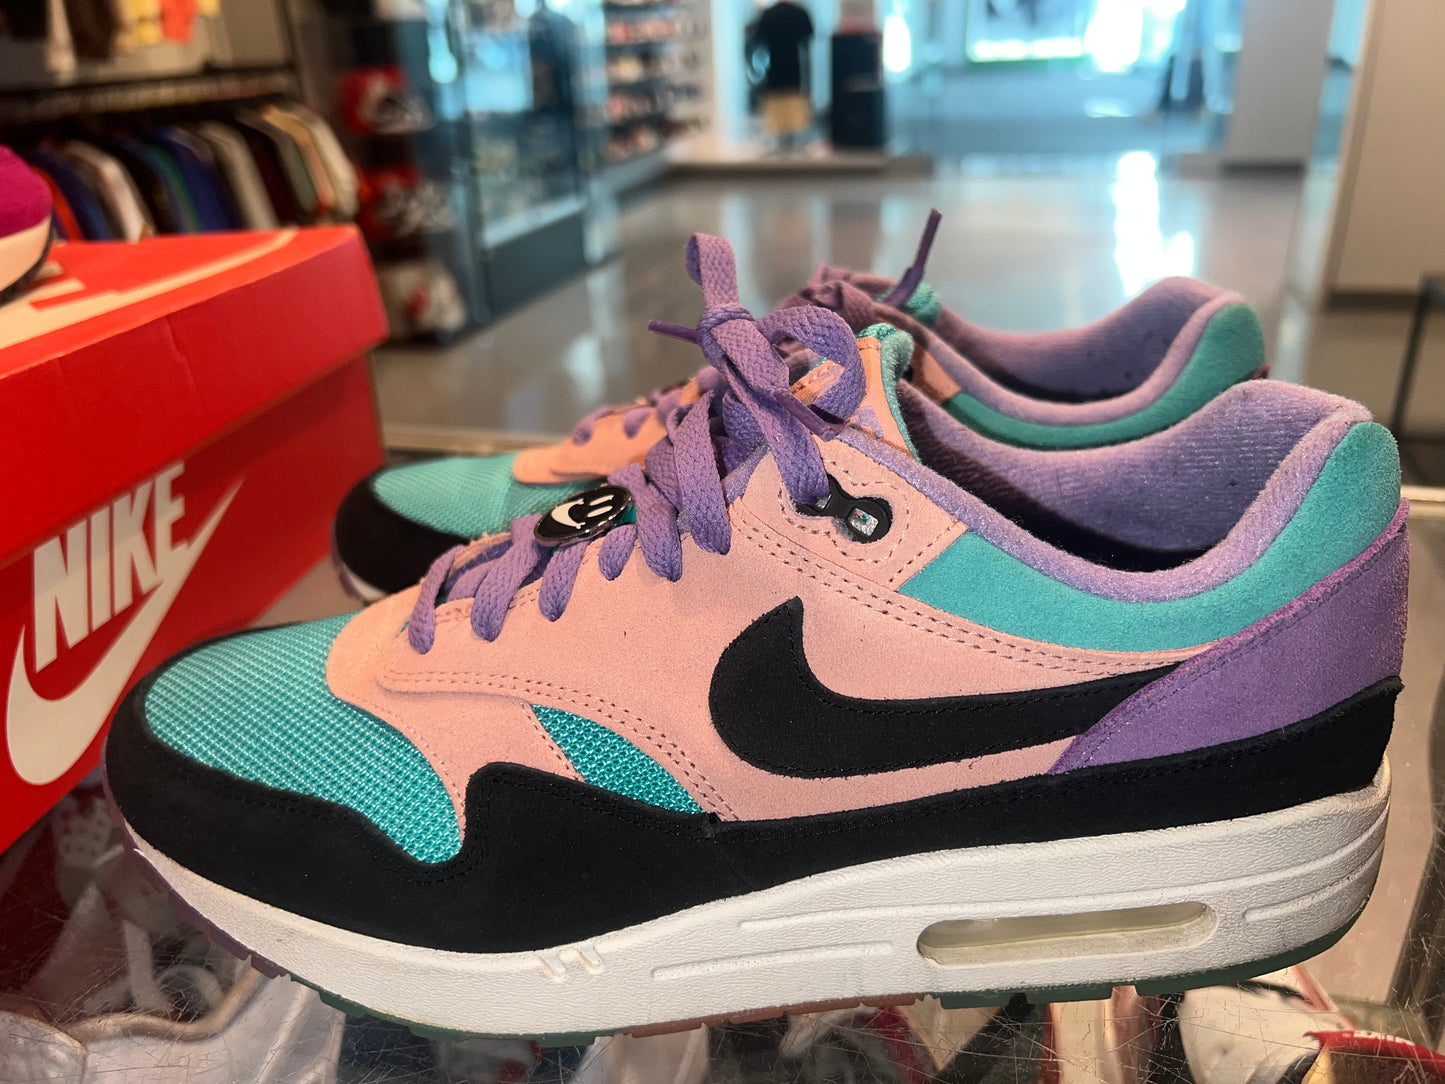 Size 10 Air Max 1 “Have A Nike Day” (Mall)